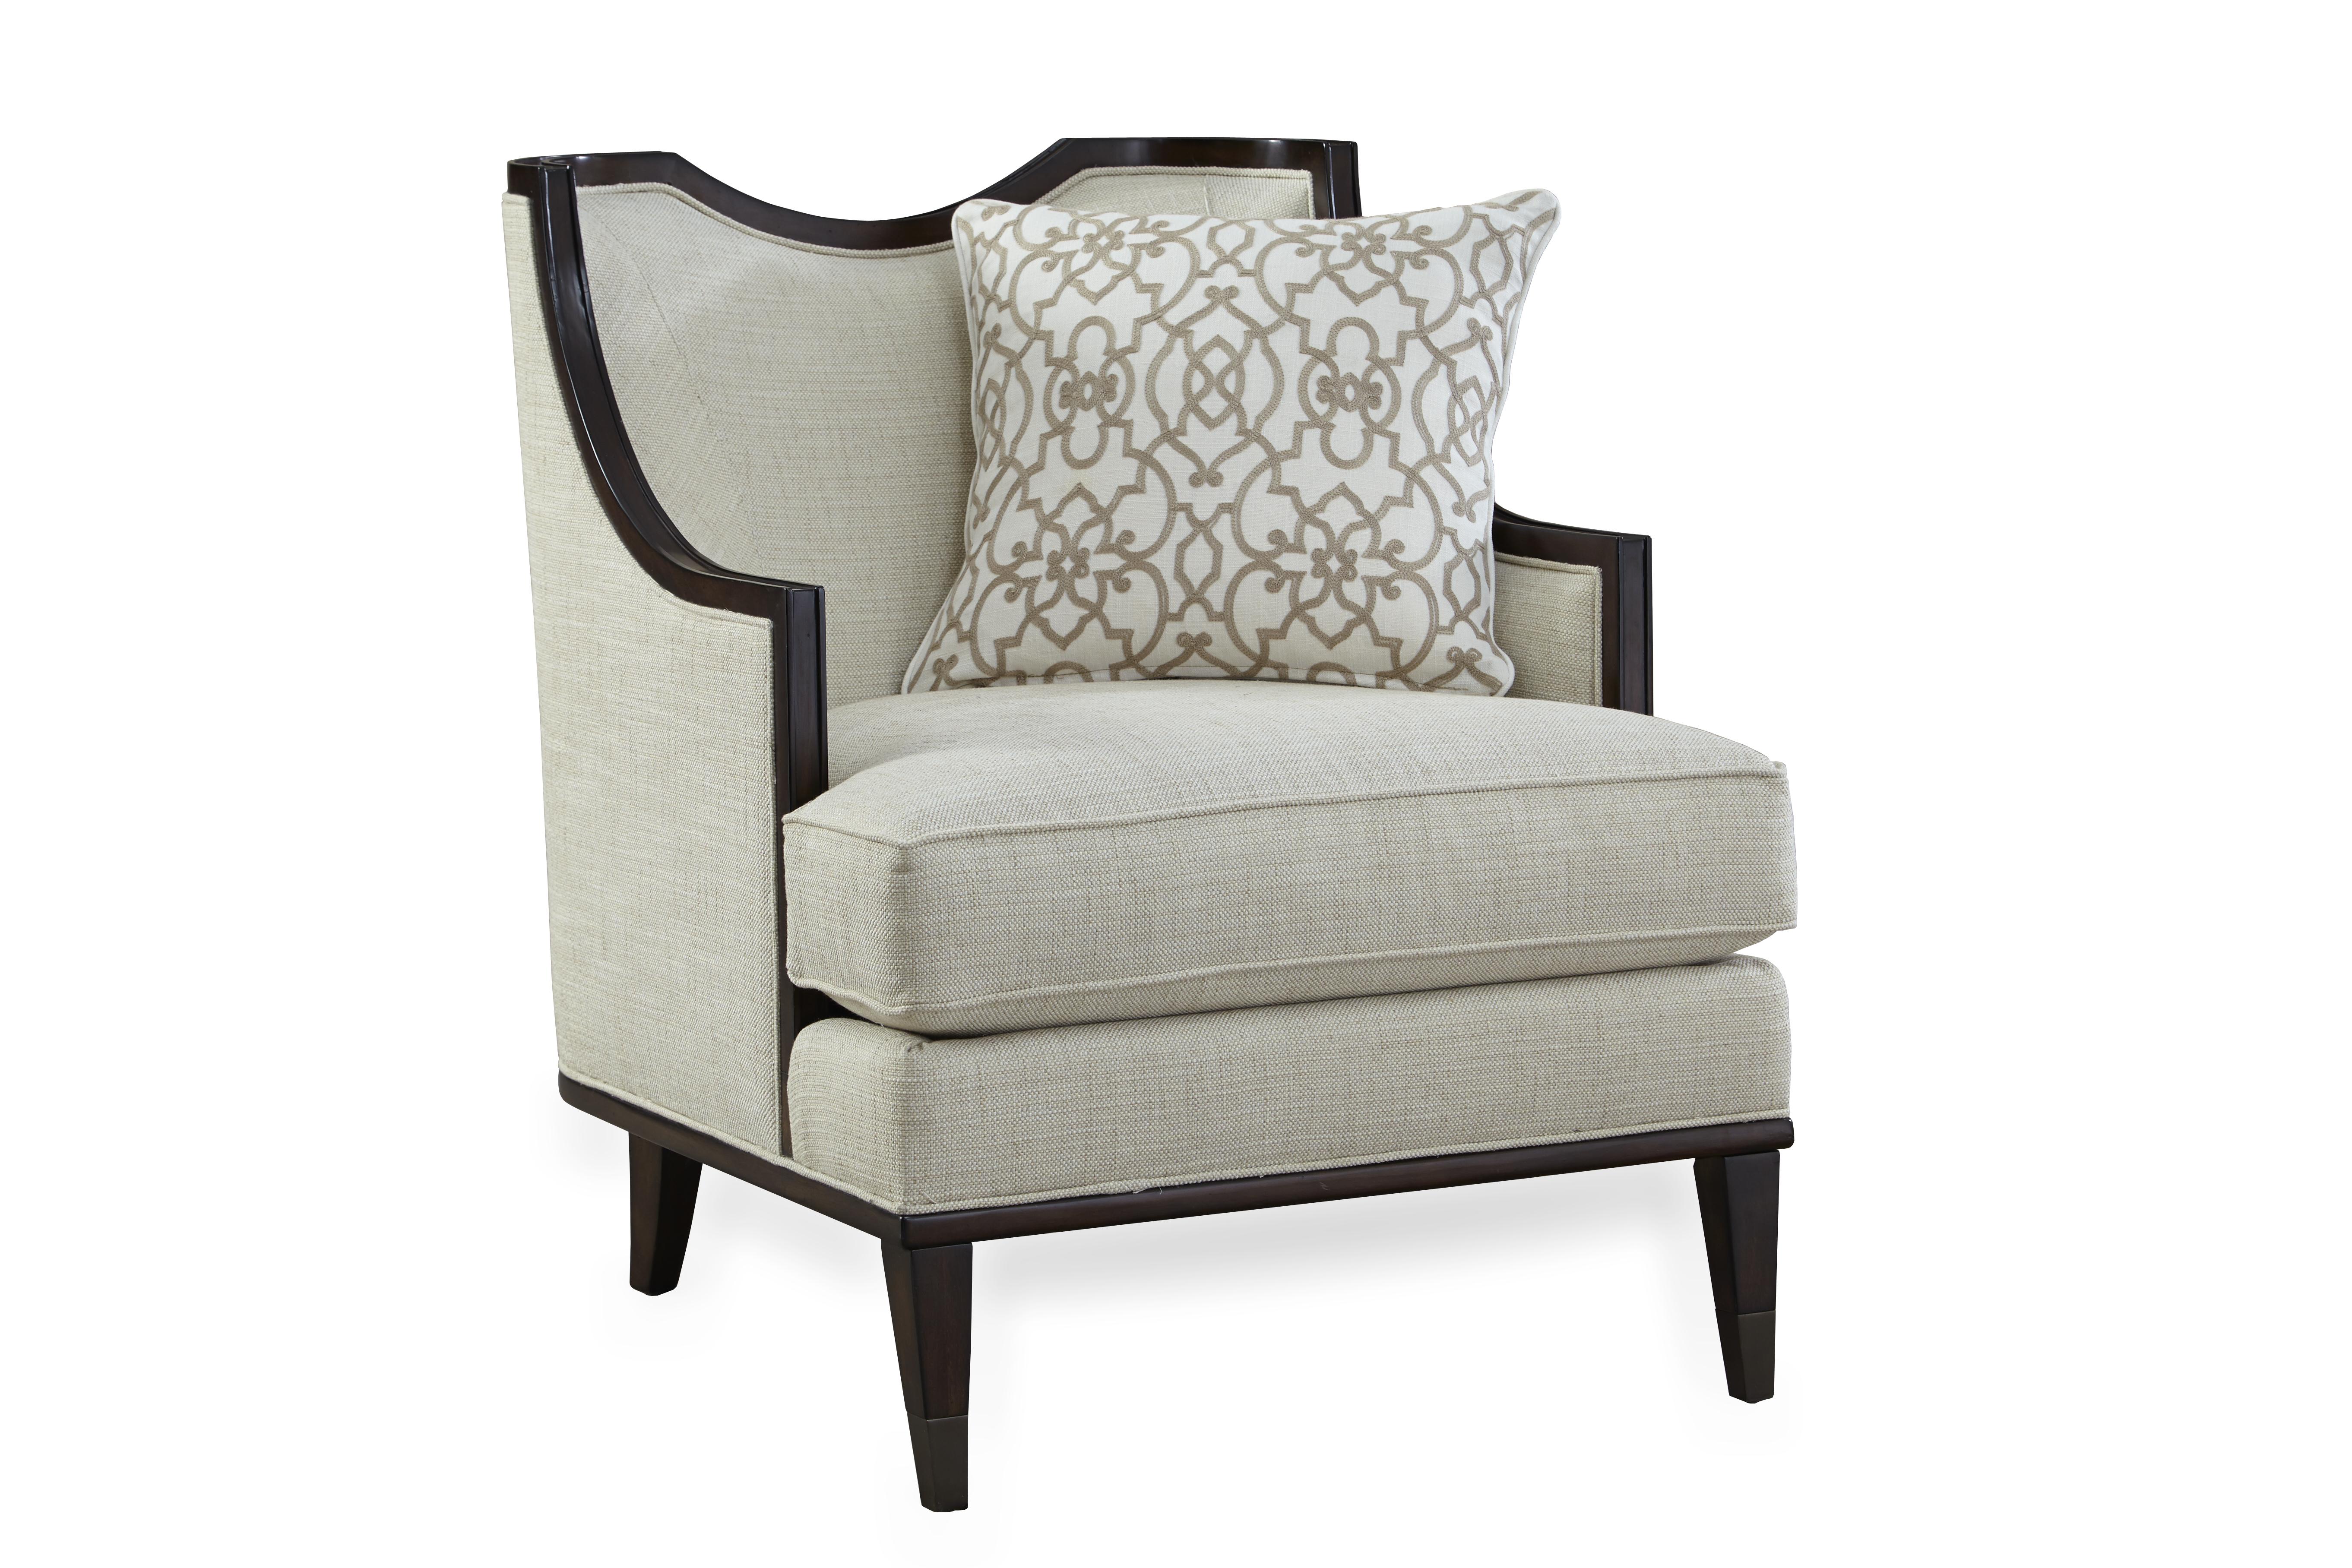 Traditional Arm Chairs Intrigue Harper 161523-5336AA in Ivory Fabric